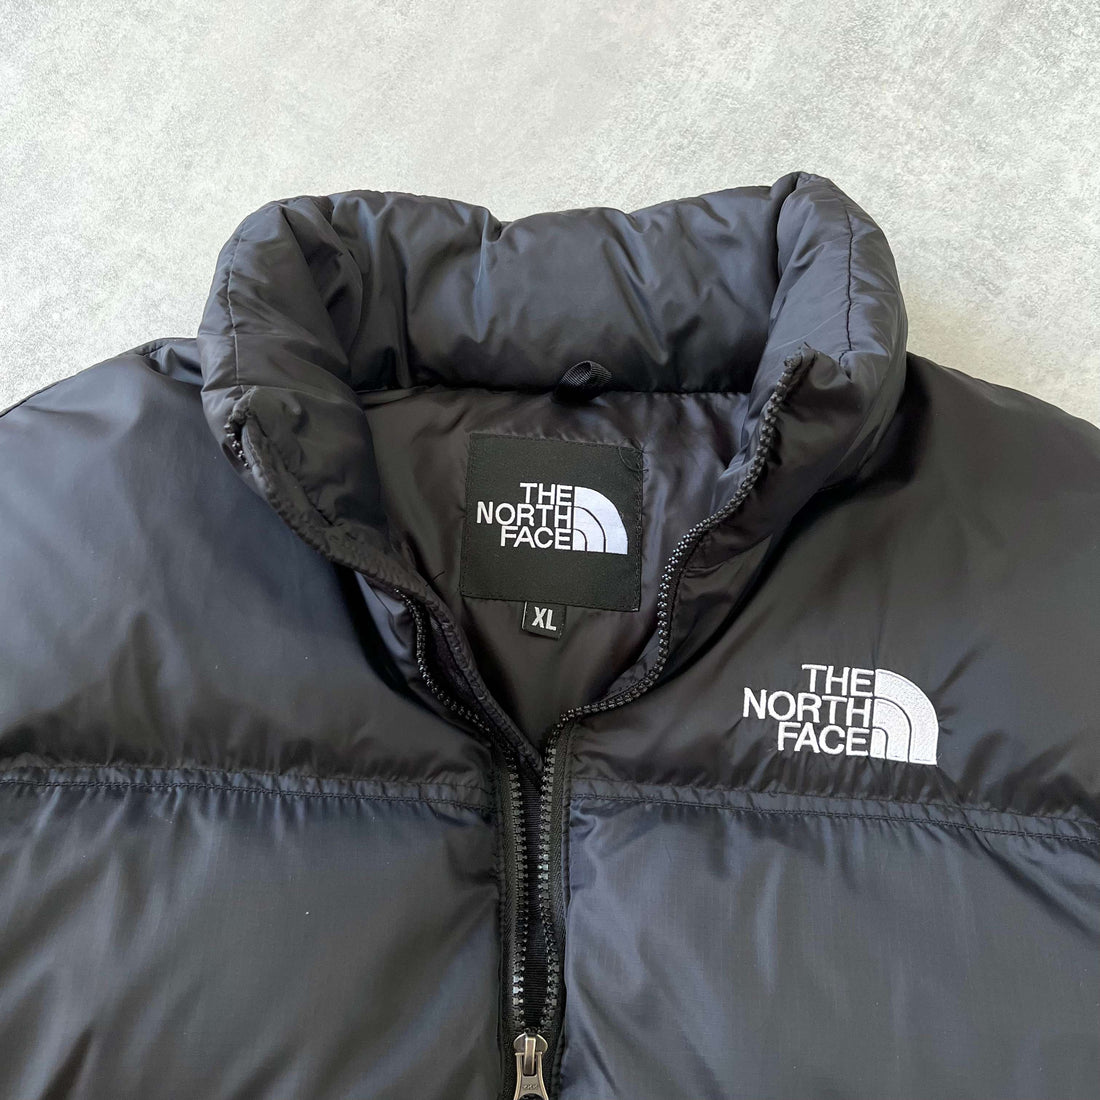 The North Face 1996 Nuptse 700 puffer jacket (XL)